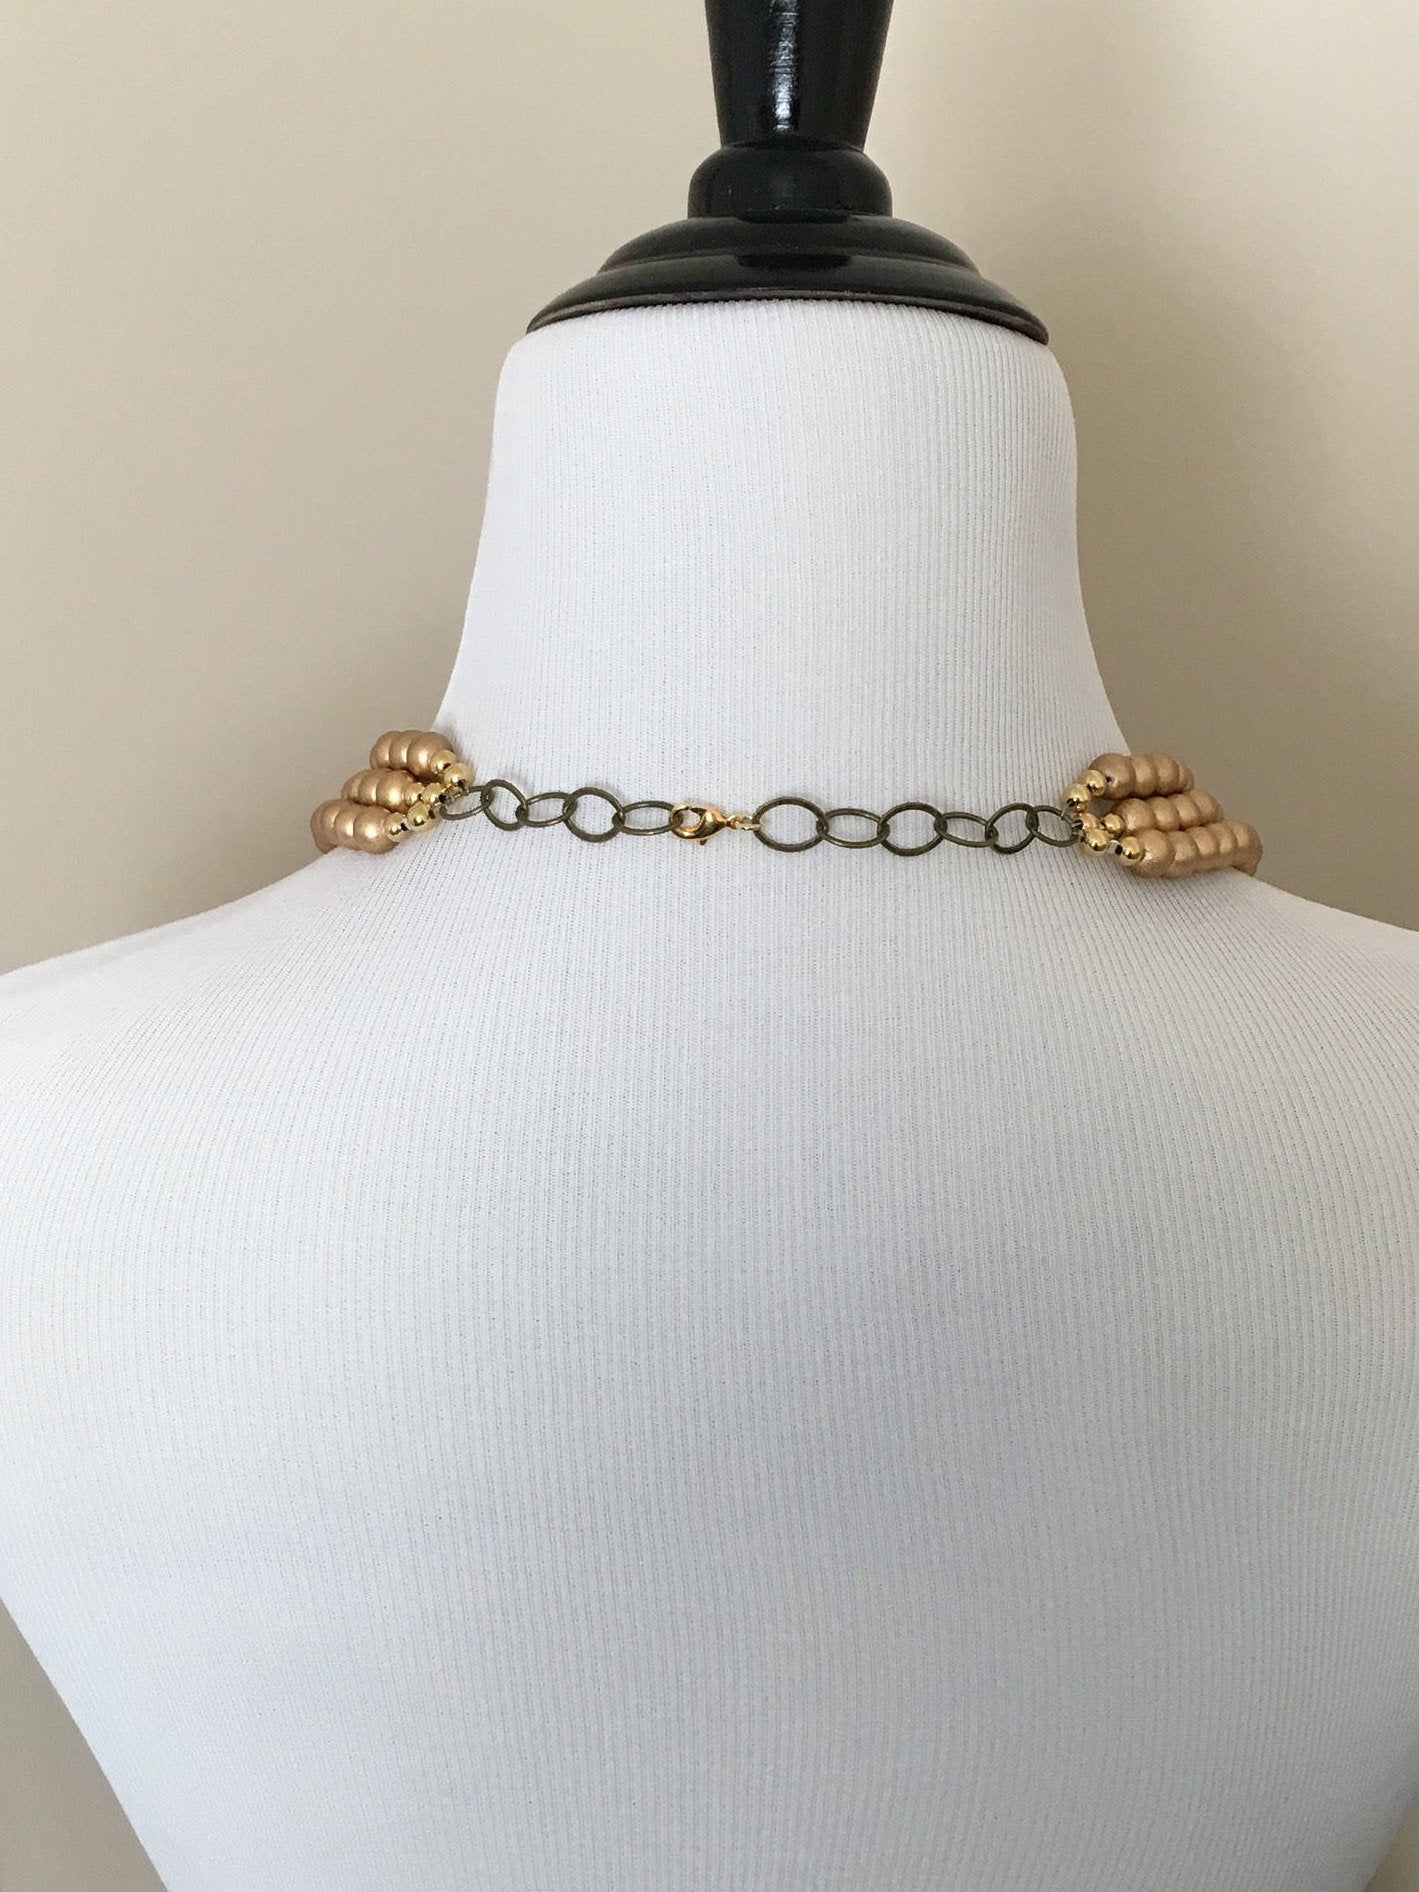 Back of mannequin wearing necklace with adjustable chain on lobster claw clasp